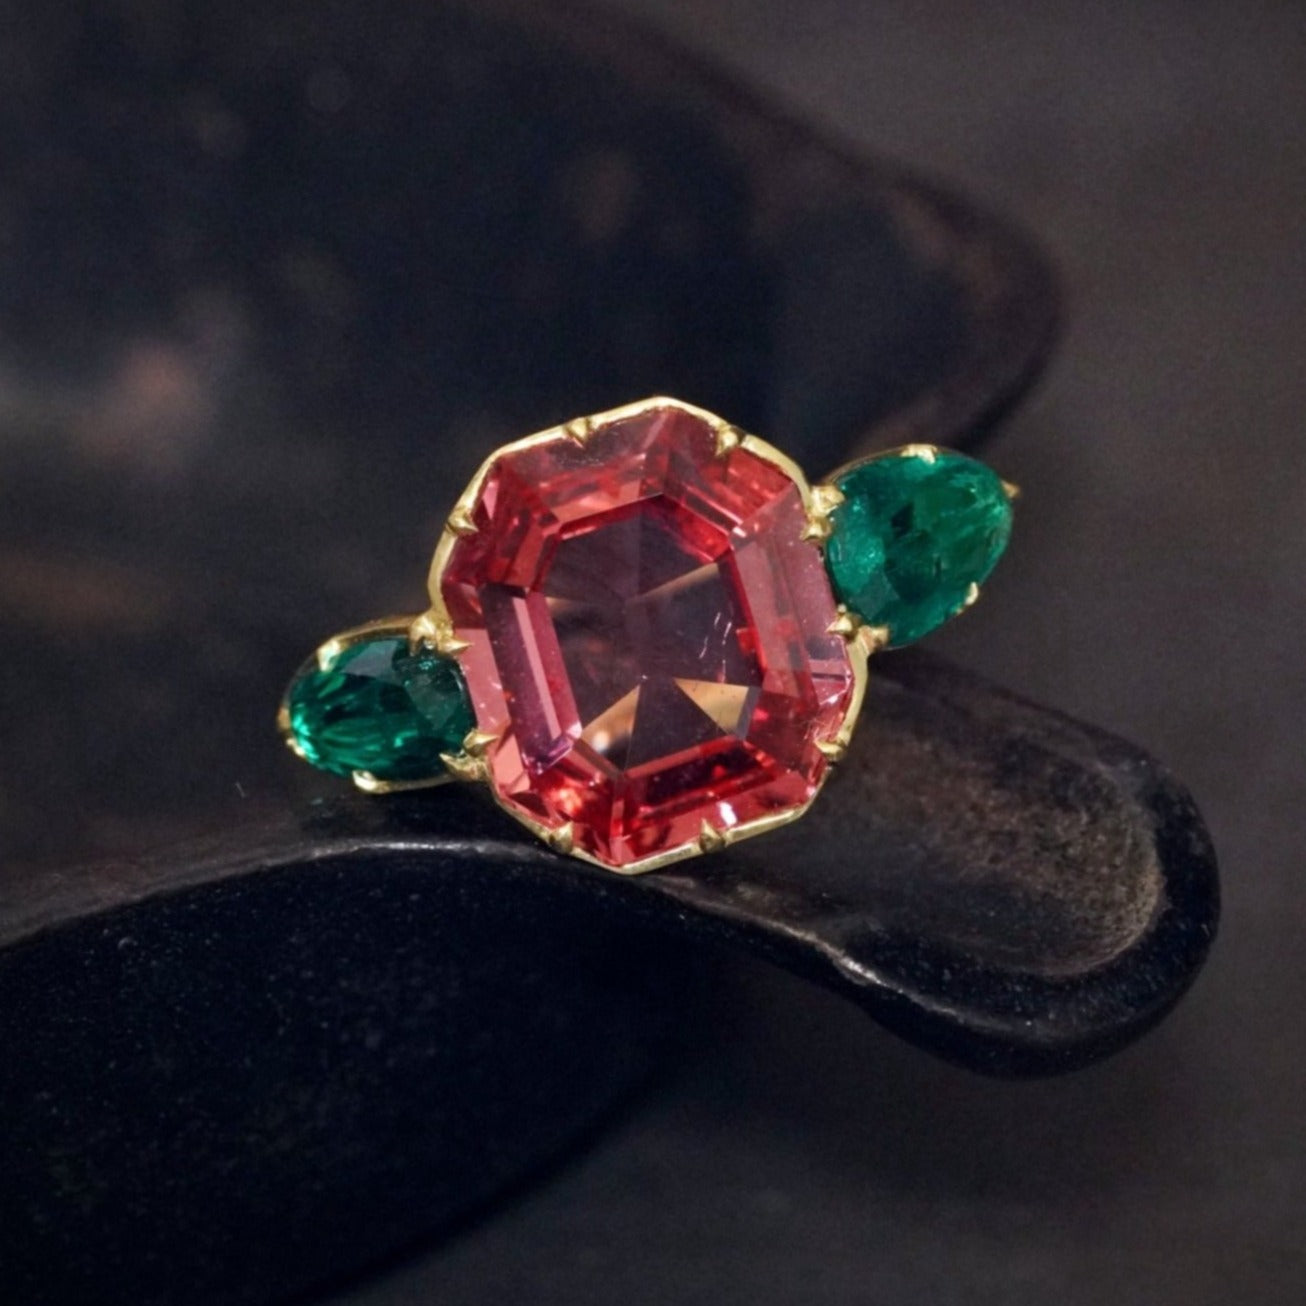 Exquisite 7.08ct Spinel & Emerald Gold Ring